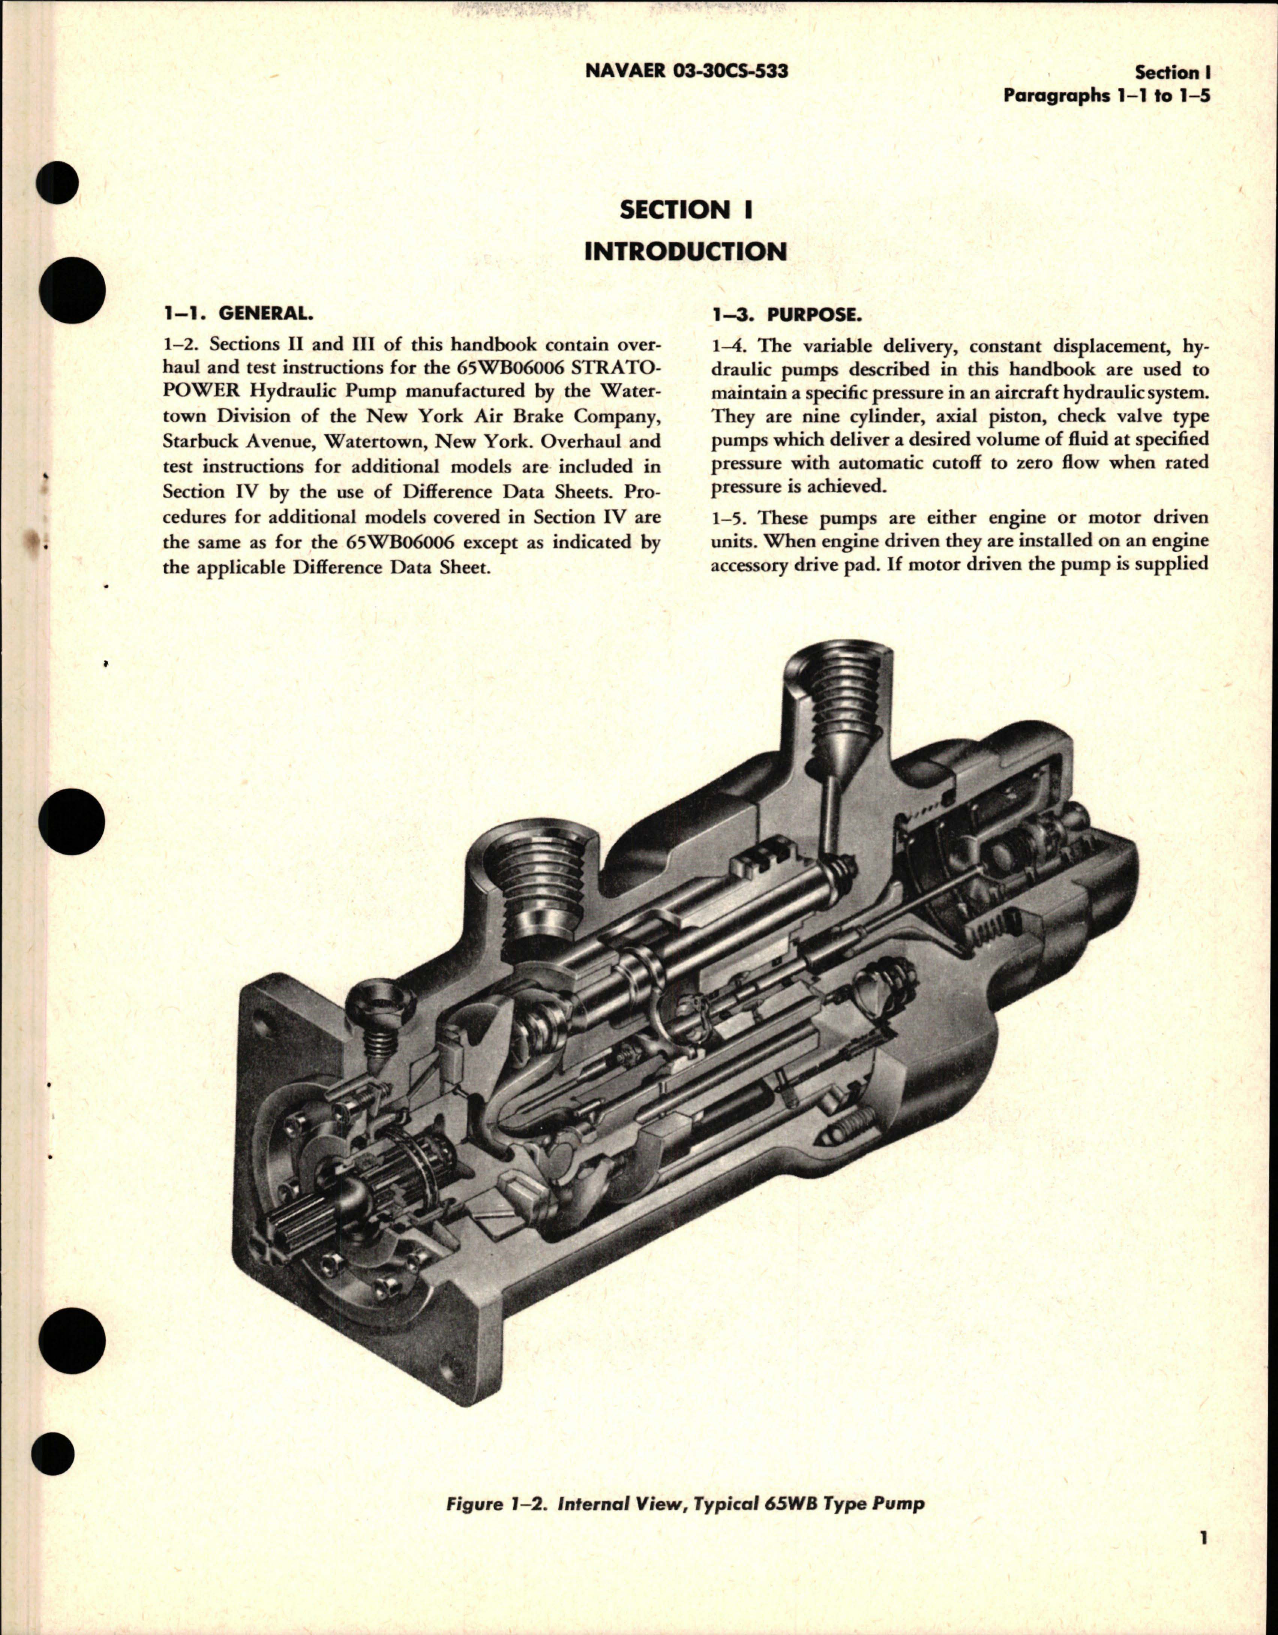 Sample page 5 from AirCorps Library document: Overhaul Instructions for Stratopower Hydraulic Pumps - Models 65WB06006, 65WB06006-1, 65WB06006-2 